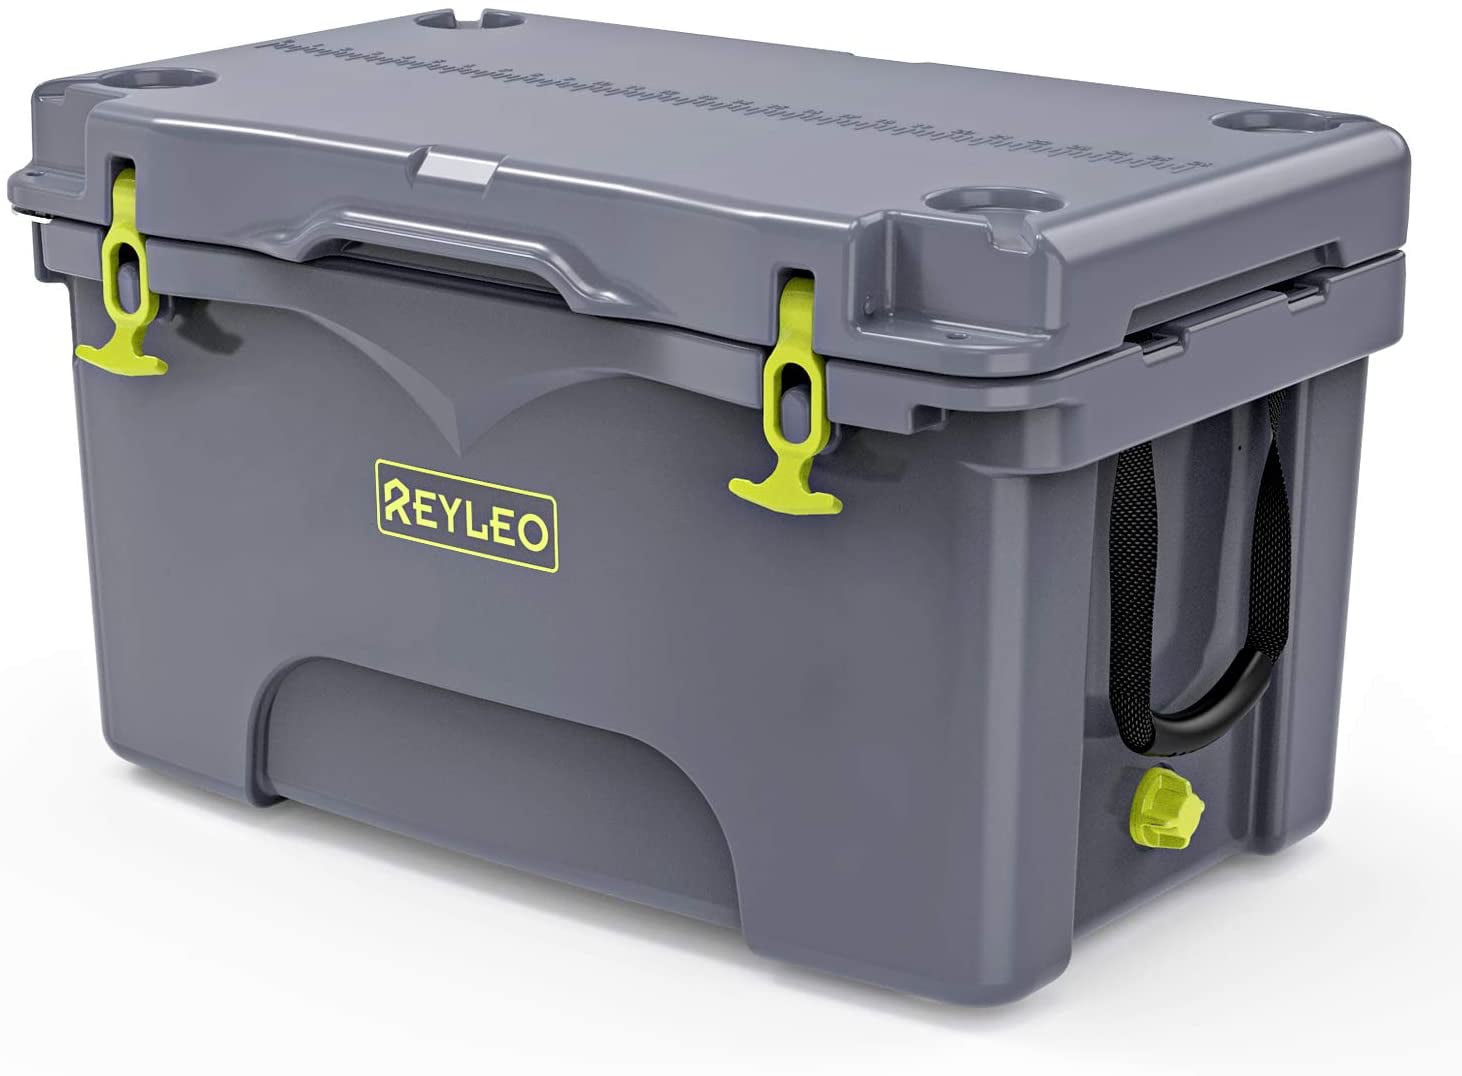 REYLEO 52 Quart Portable Rotomolded Cooler Heavy-Duty Ice Chest with Fish Ruler 